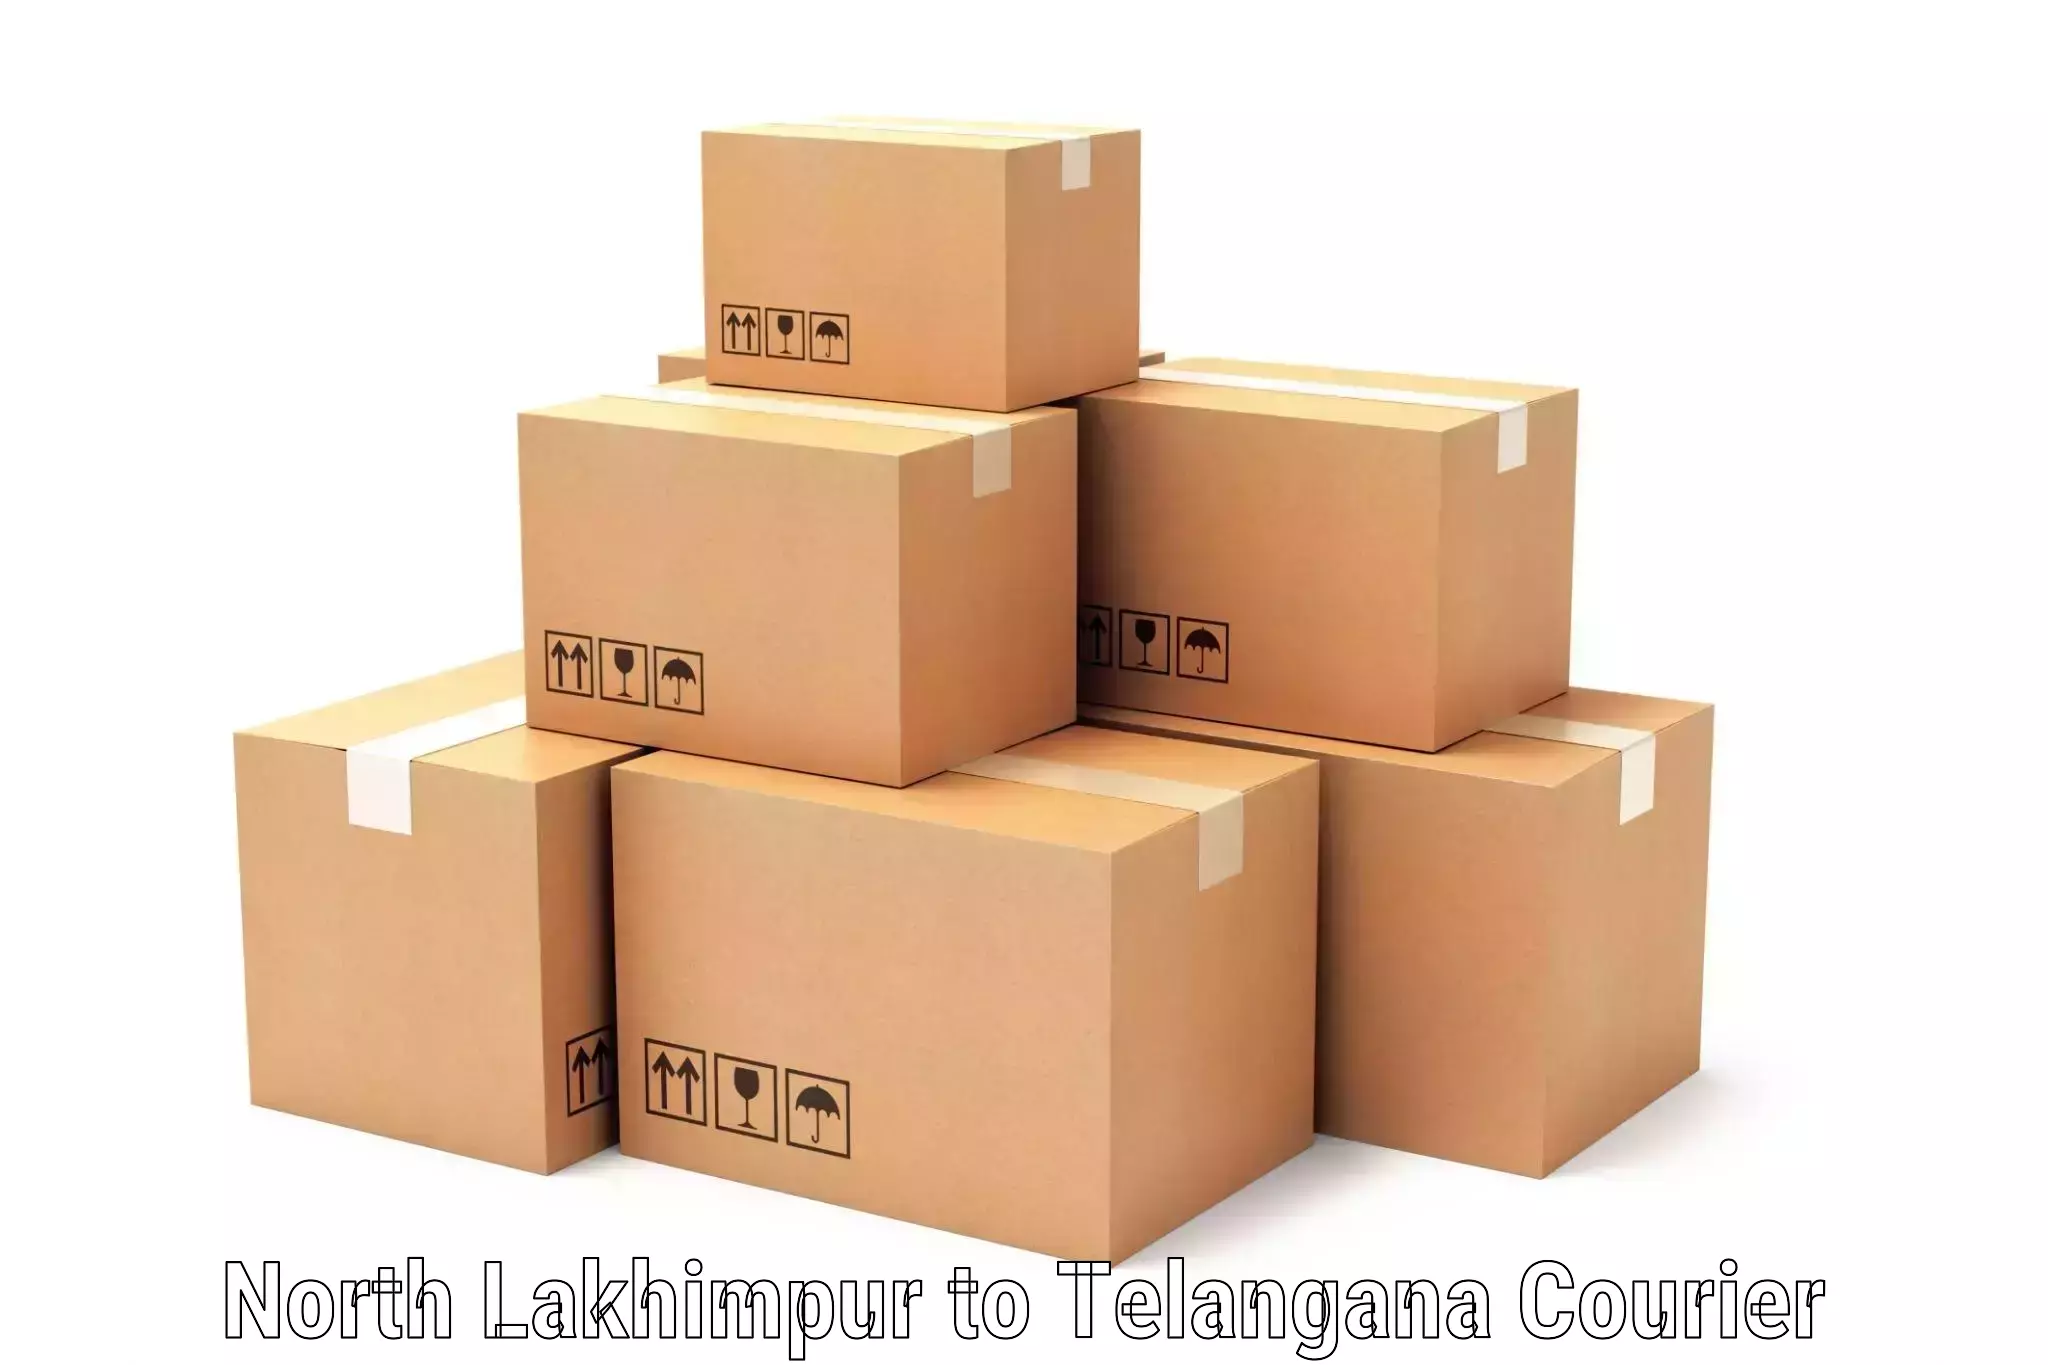 Reliable courier services North Lakhimpur to Nizamabad